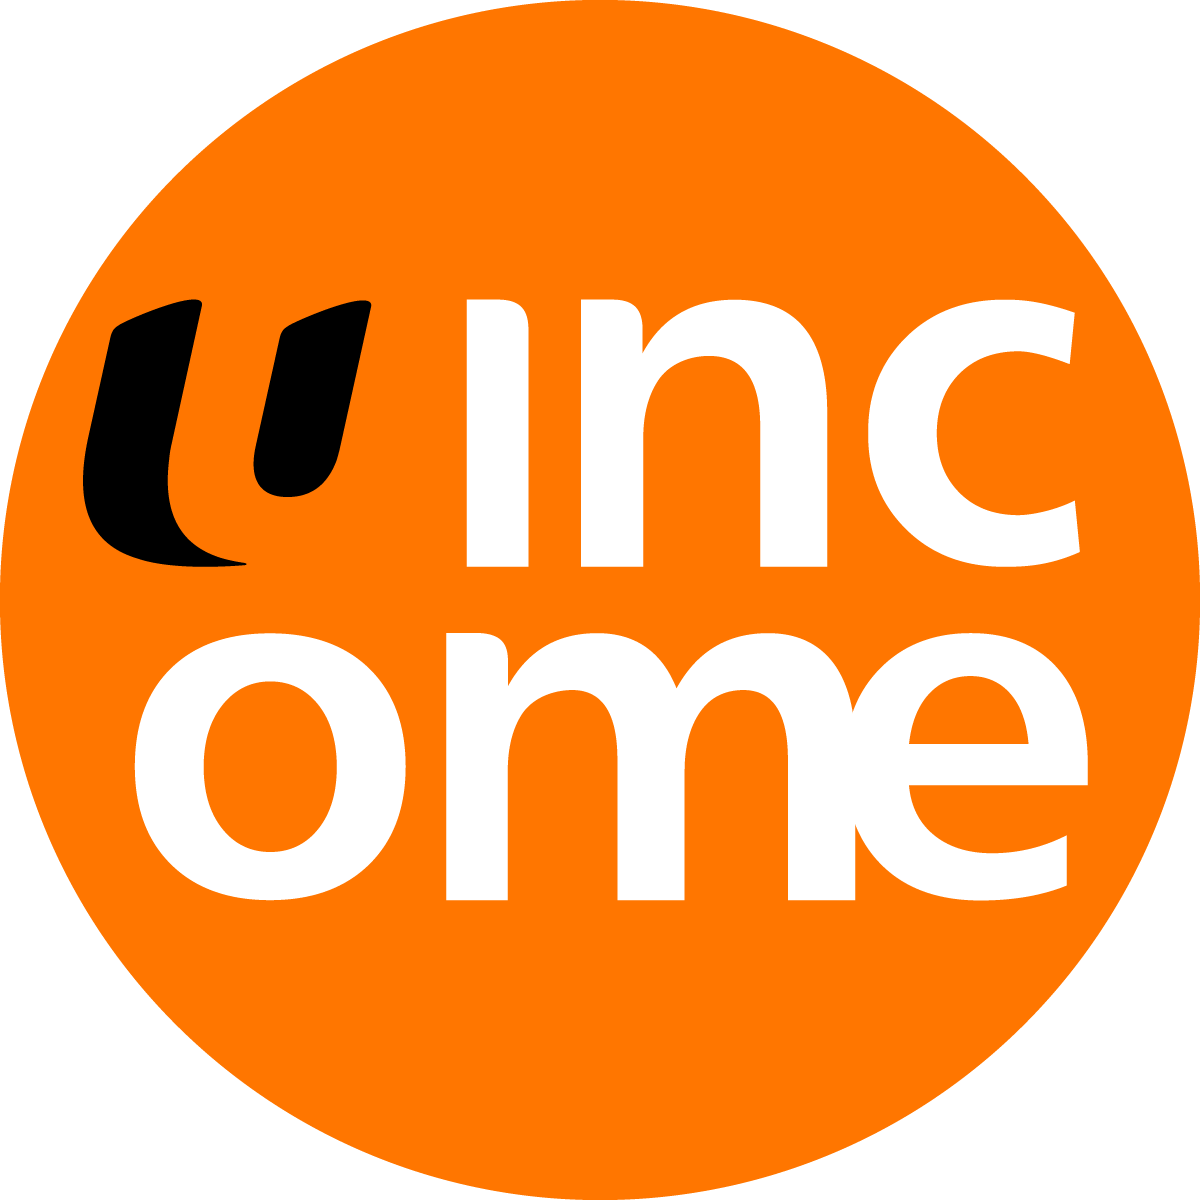 ntuc income daily travel insurance